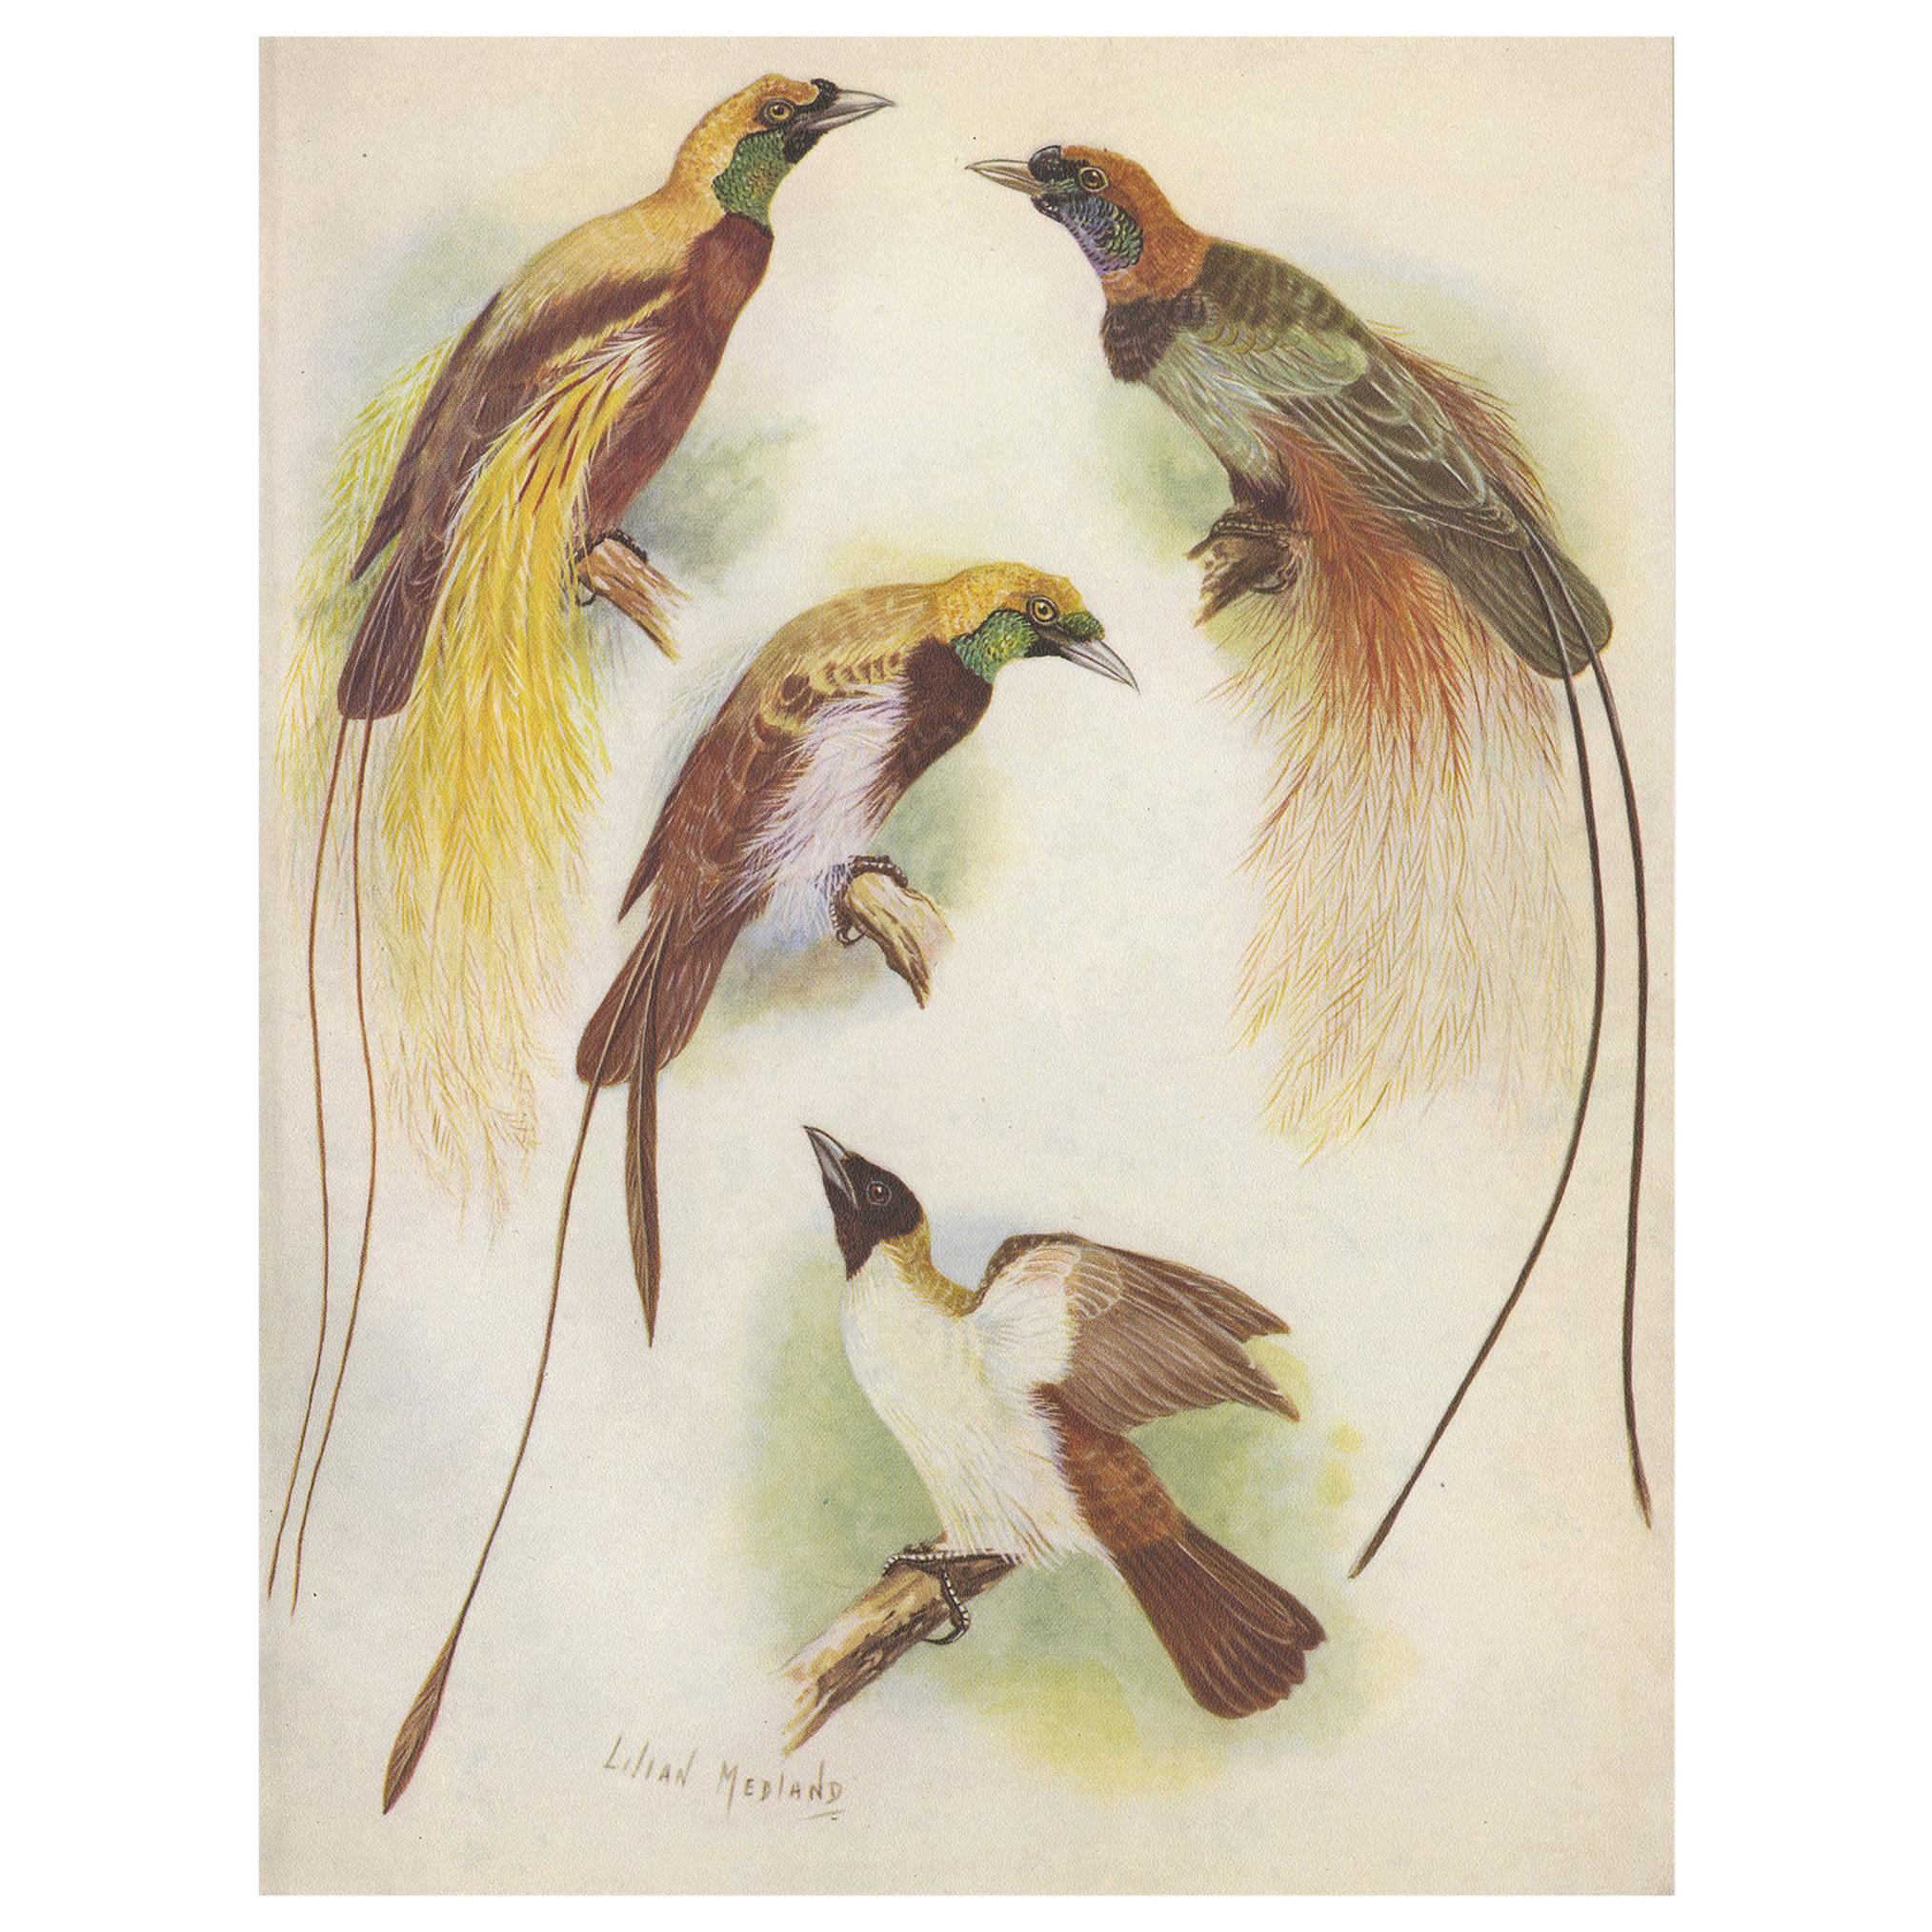 Antique Print of the Blood's Bird of Paradise and the Lesser Bird of Paradise